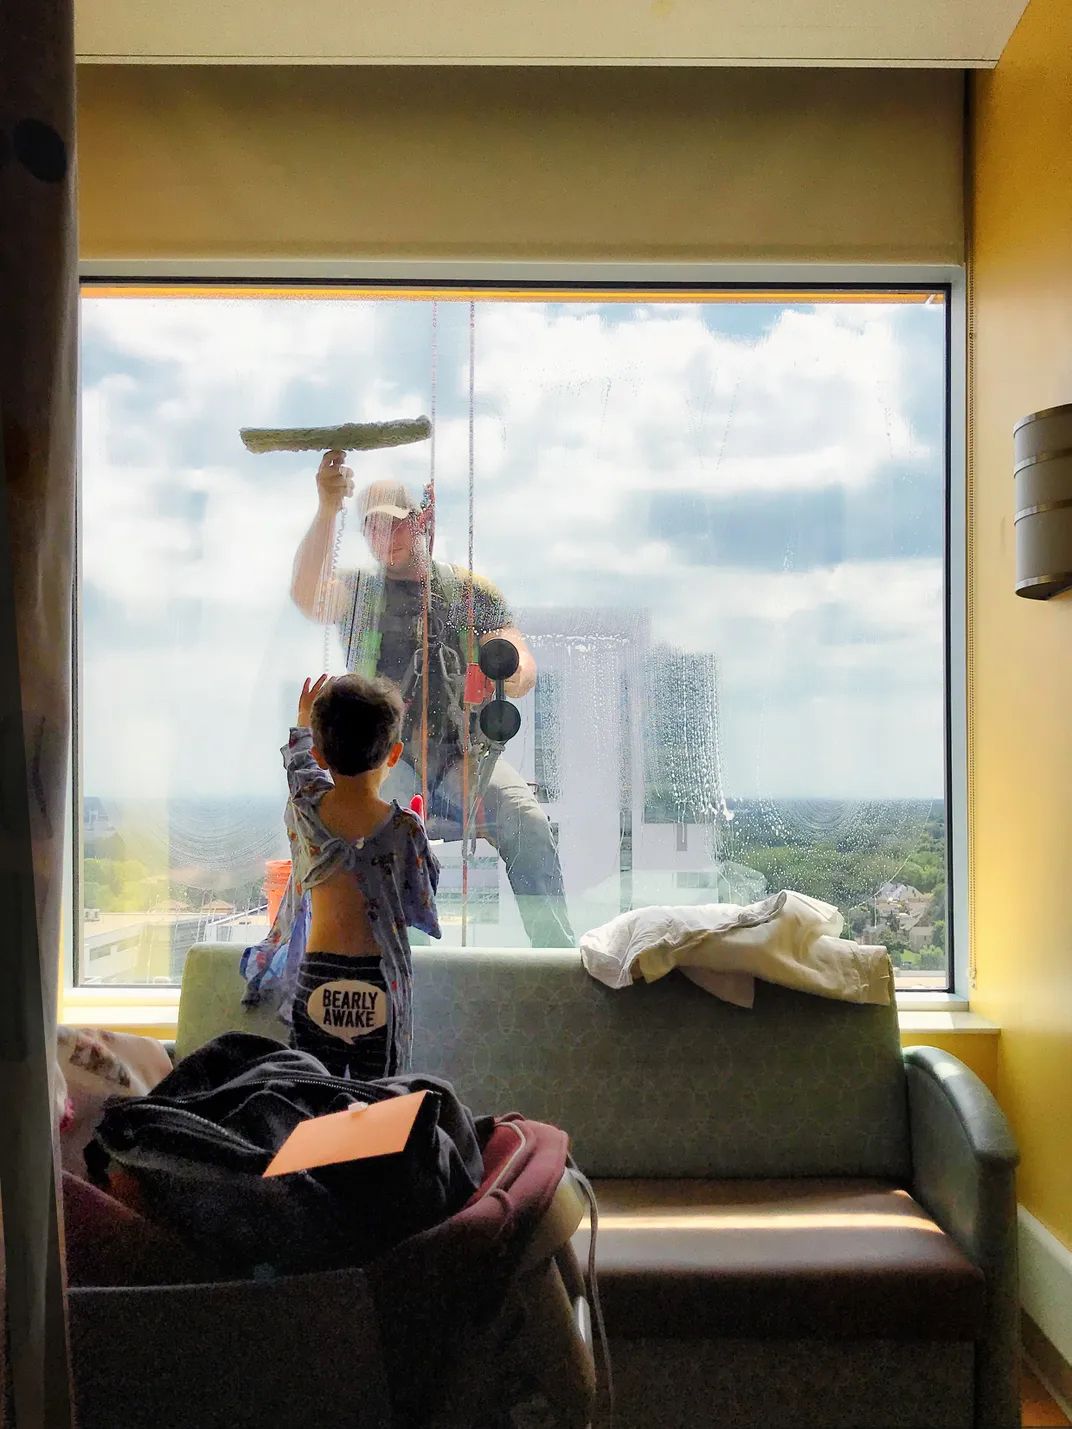 8 - They say you don’t need a cape to be a hero. Sometimes a squeegee and a baseball cap will do, as this window washer found out. He brightened the day of a young hospital patient just by hanging out at work.